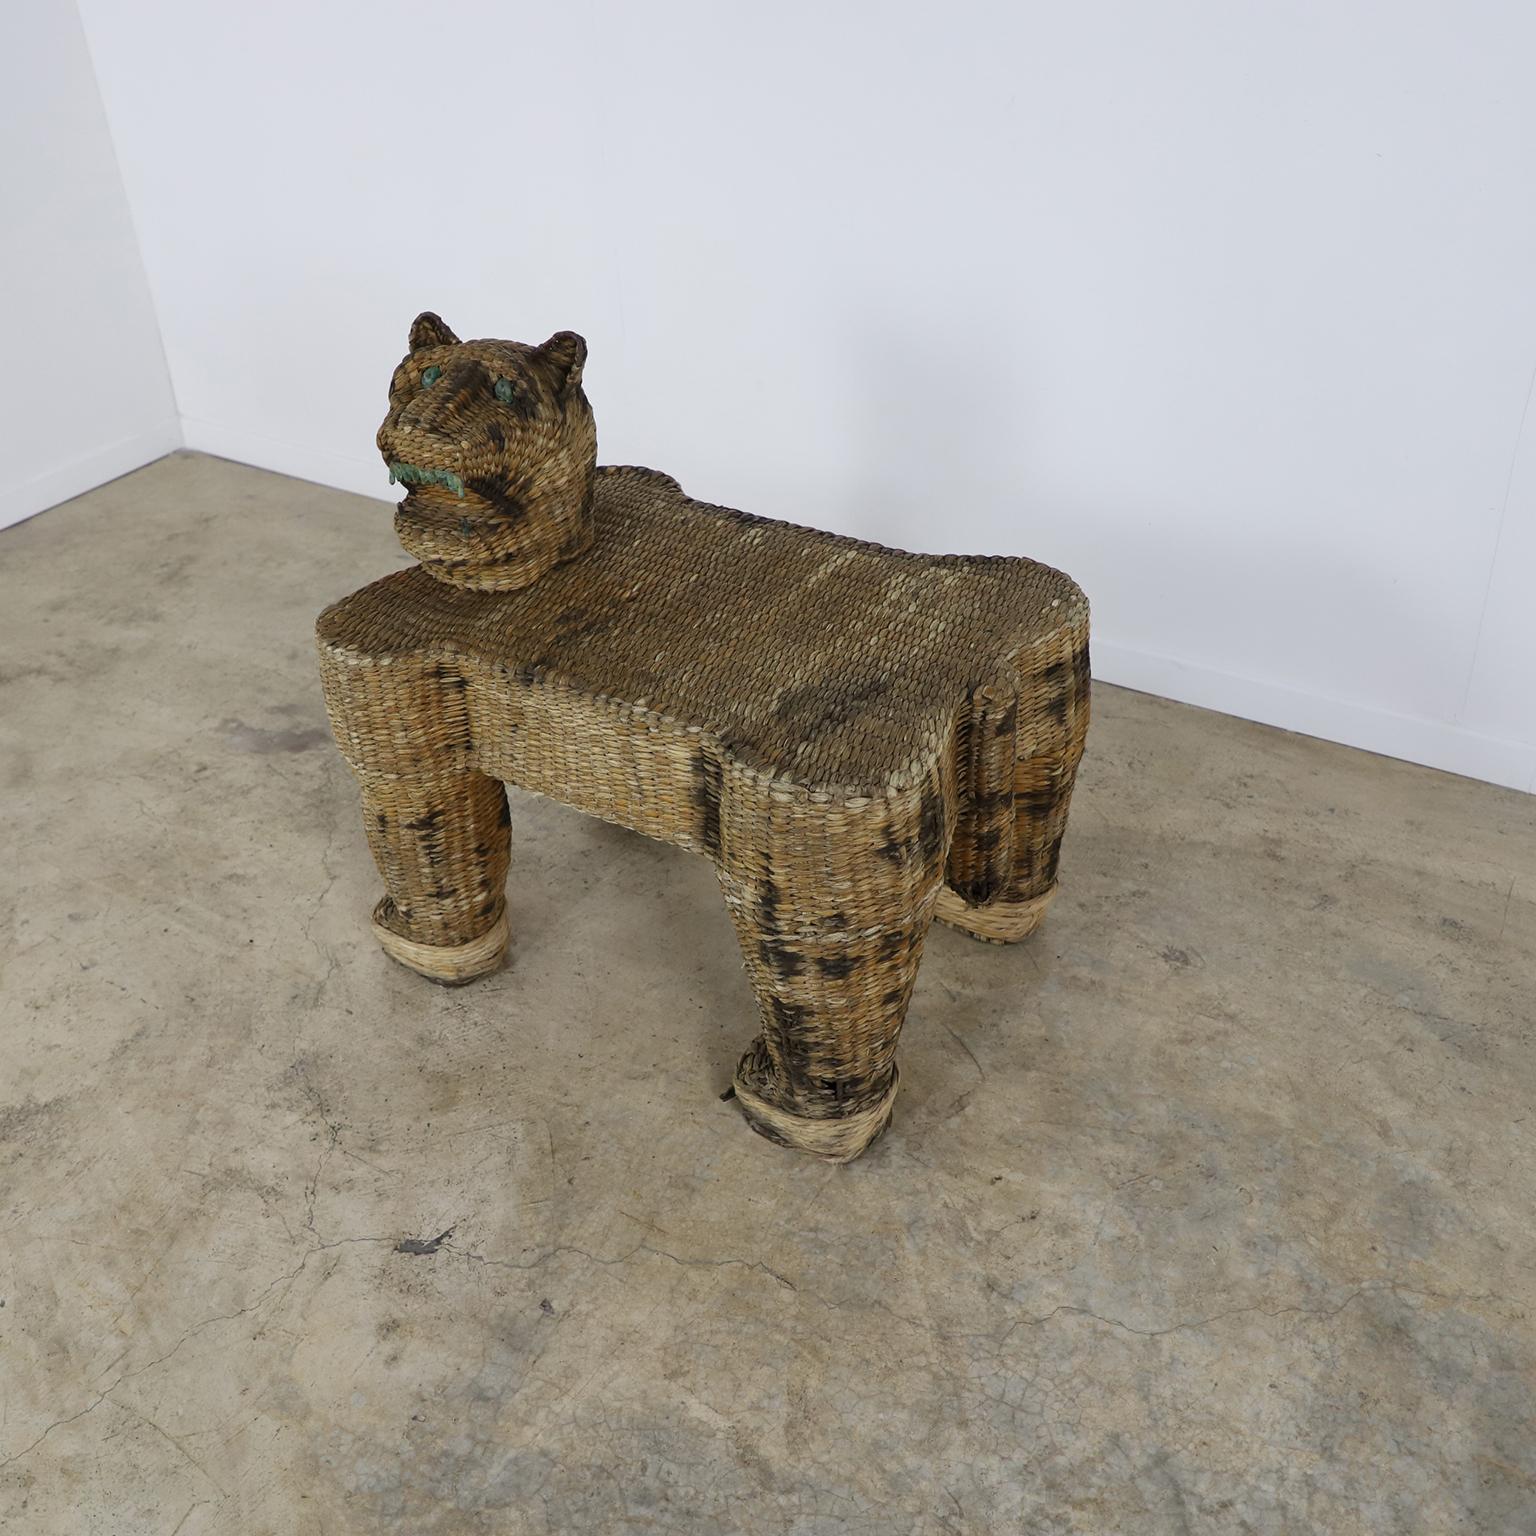 Circa 1970, we offer this Antique Mario Lopez Torres Jaguar Stool, made in natural woven and iron structure, the eyes are made in precious stone.